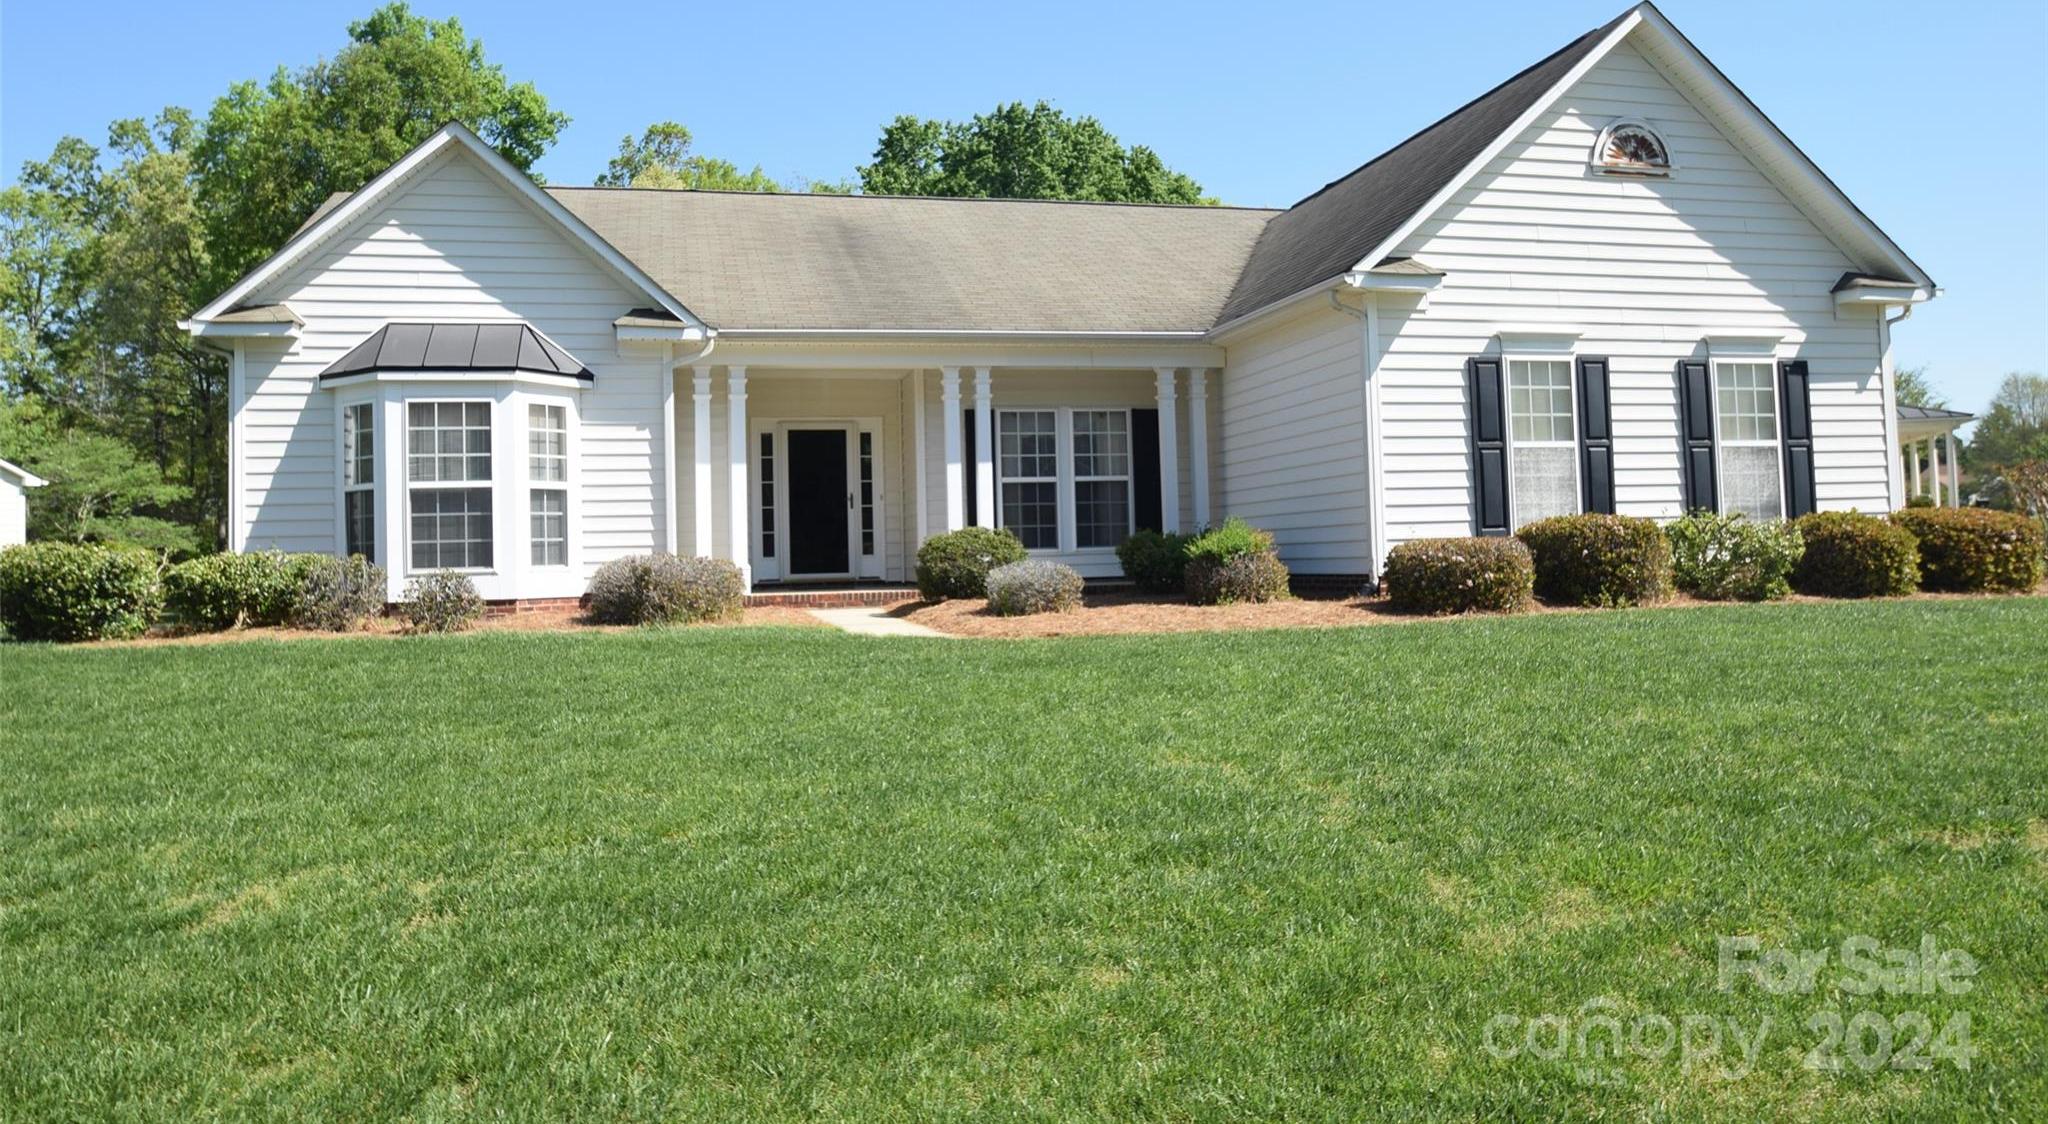 Photo one of 2020 Hollyhedge Ln Indian Trail NC 28079 | MLS 4127901